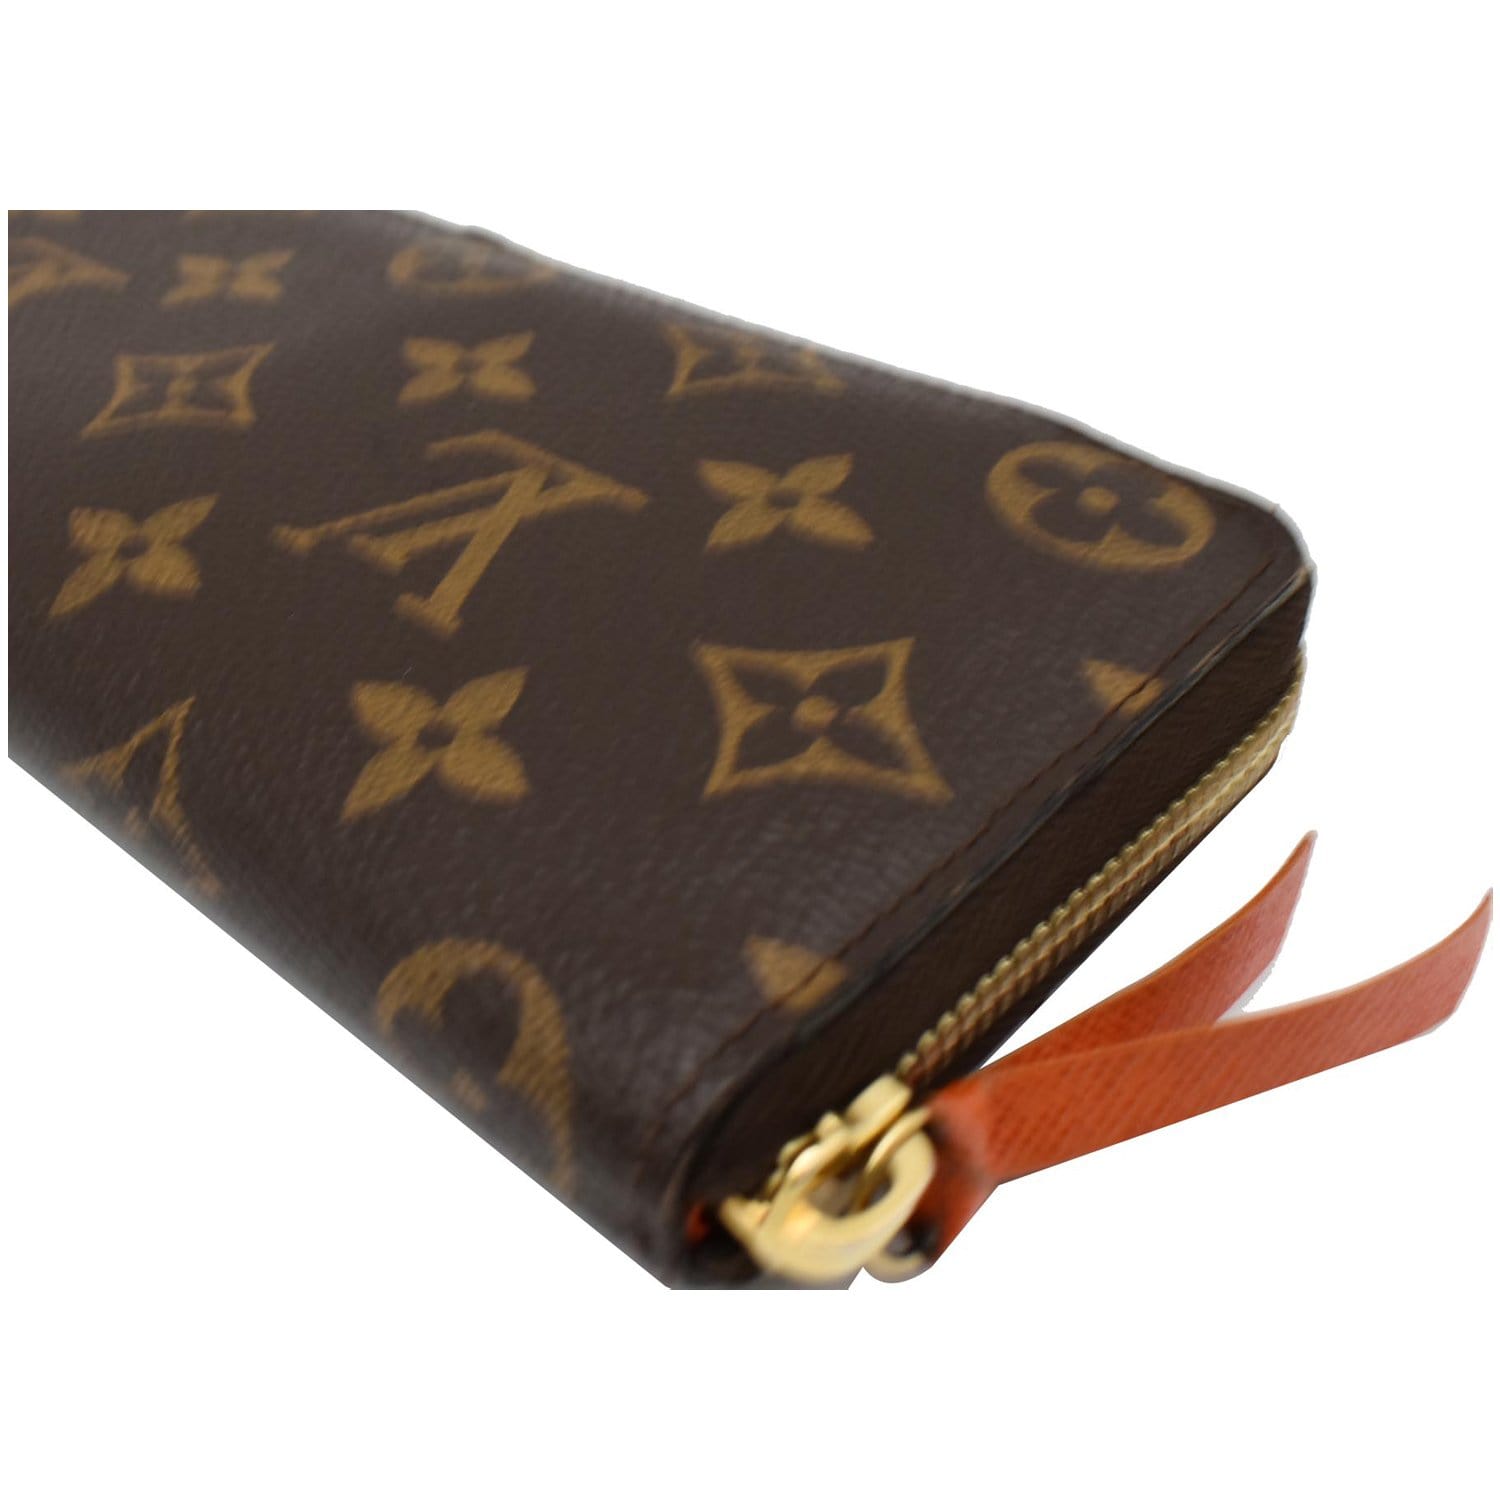 Buy Pre-owned & Brand new Luxury Louis Vuitton Clemence Monogram